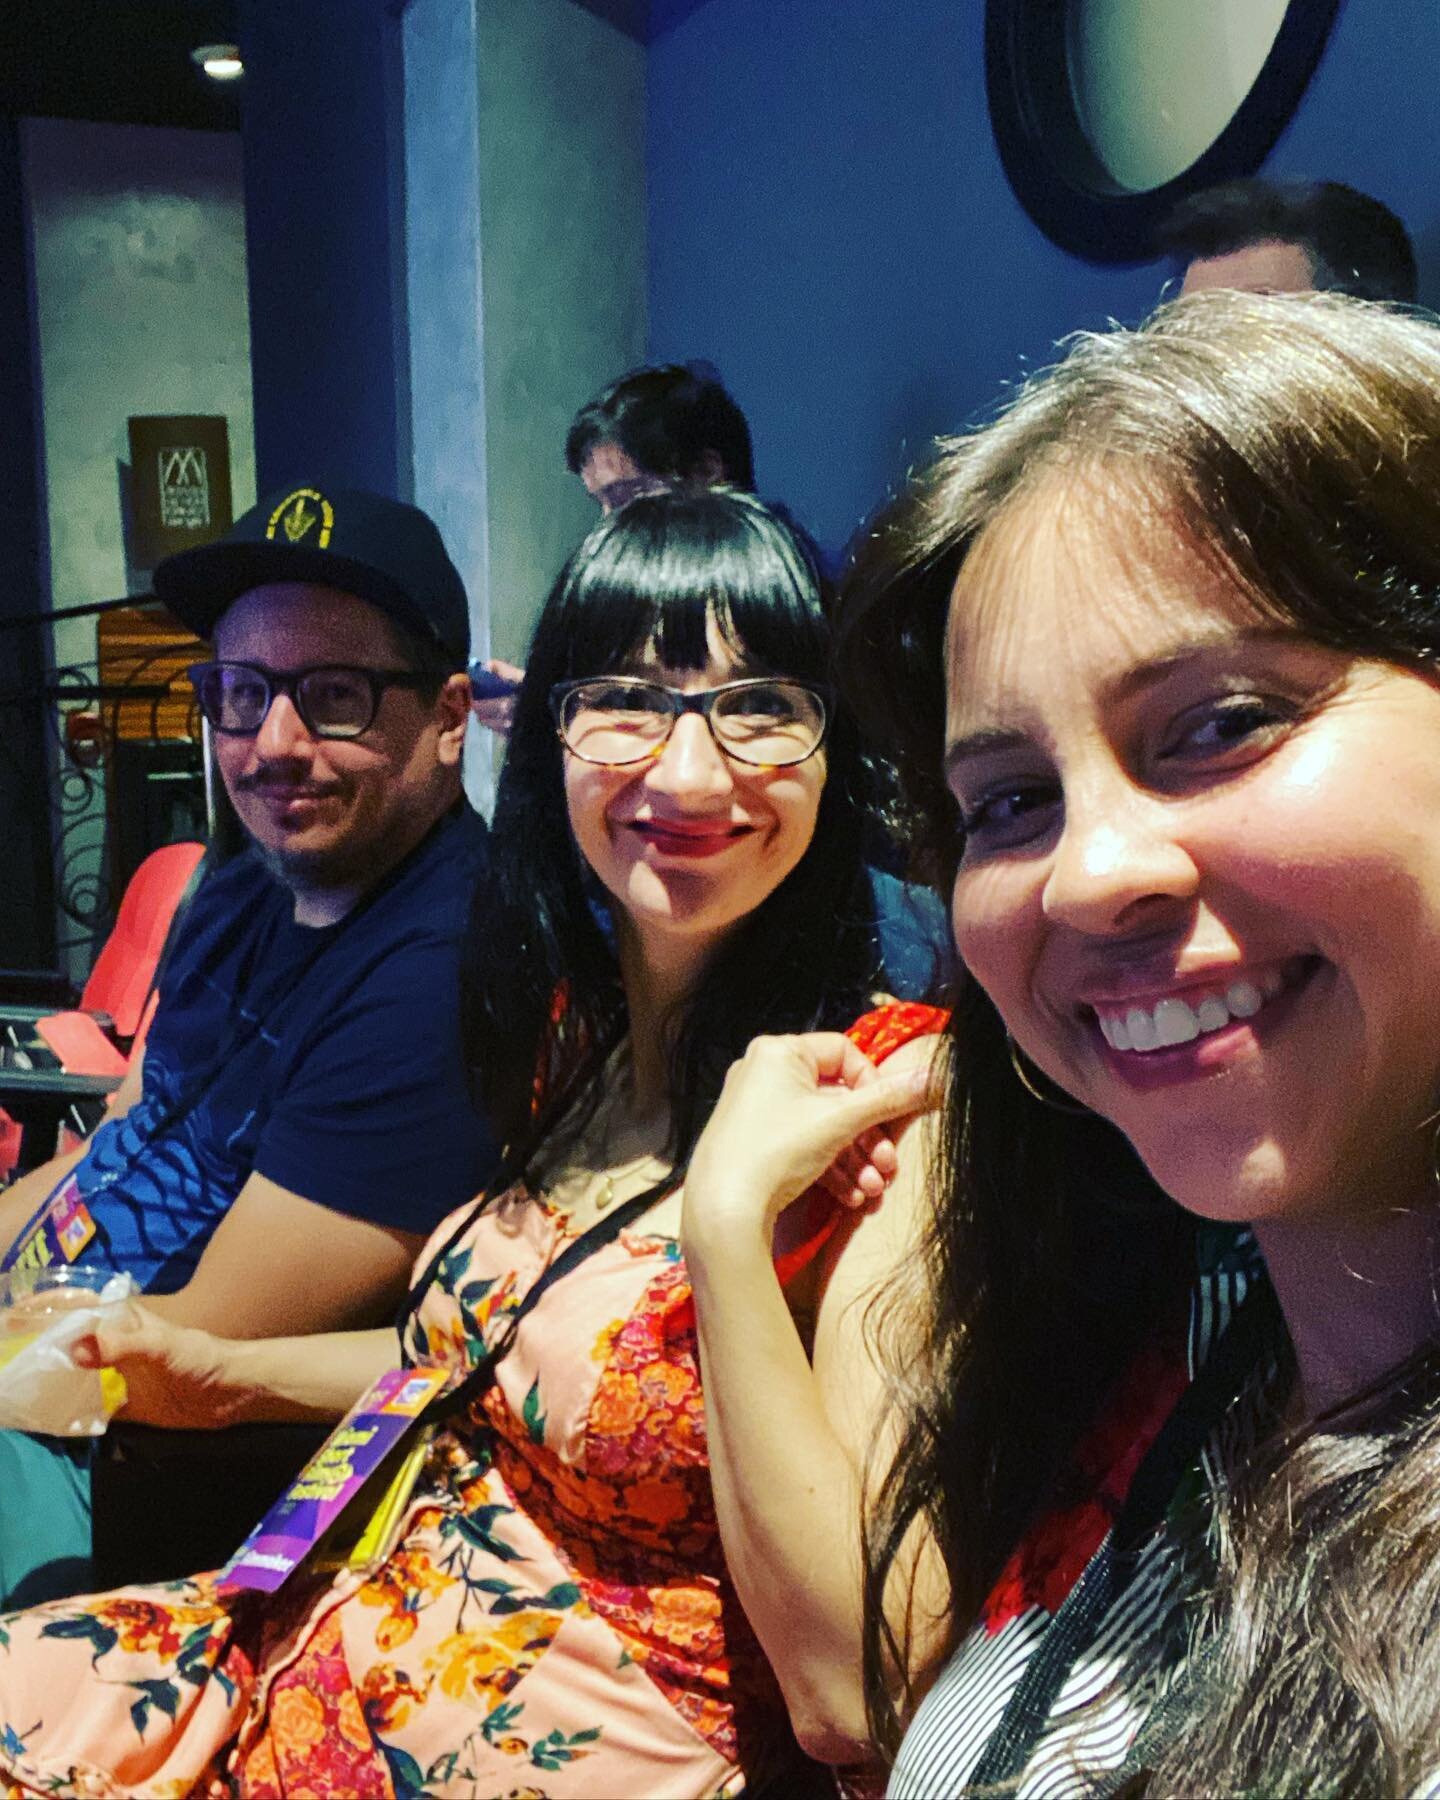 This Sunday was the first time all 3 of us have been together since we shot the film! Thanks to @miamisff for an amazing festival experience and to Miami for the beautiful weather! #miamishortfilmfestival #filmmaking #filmmakingwhilefemale #womeninfi